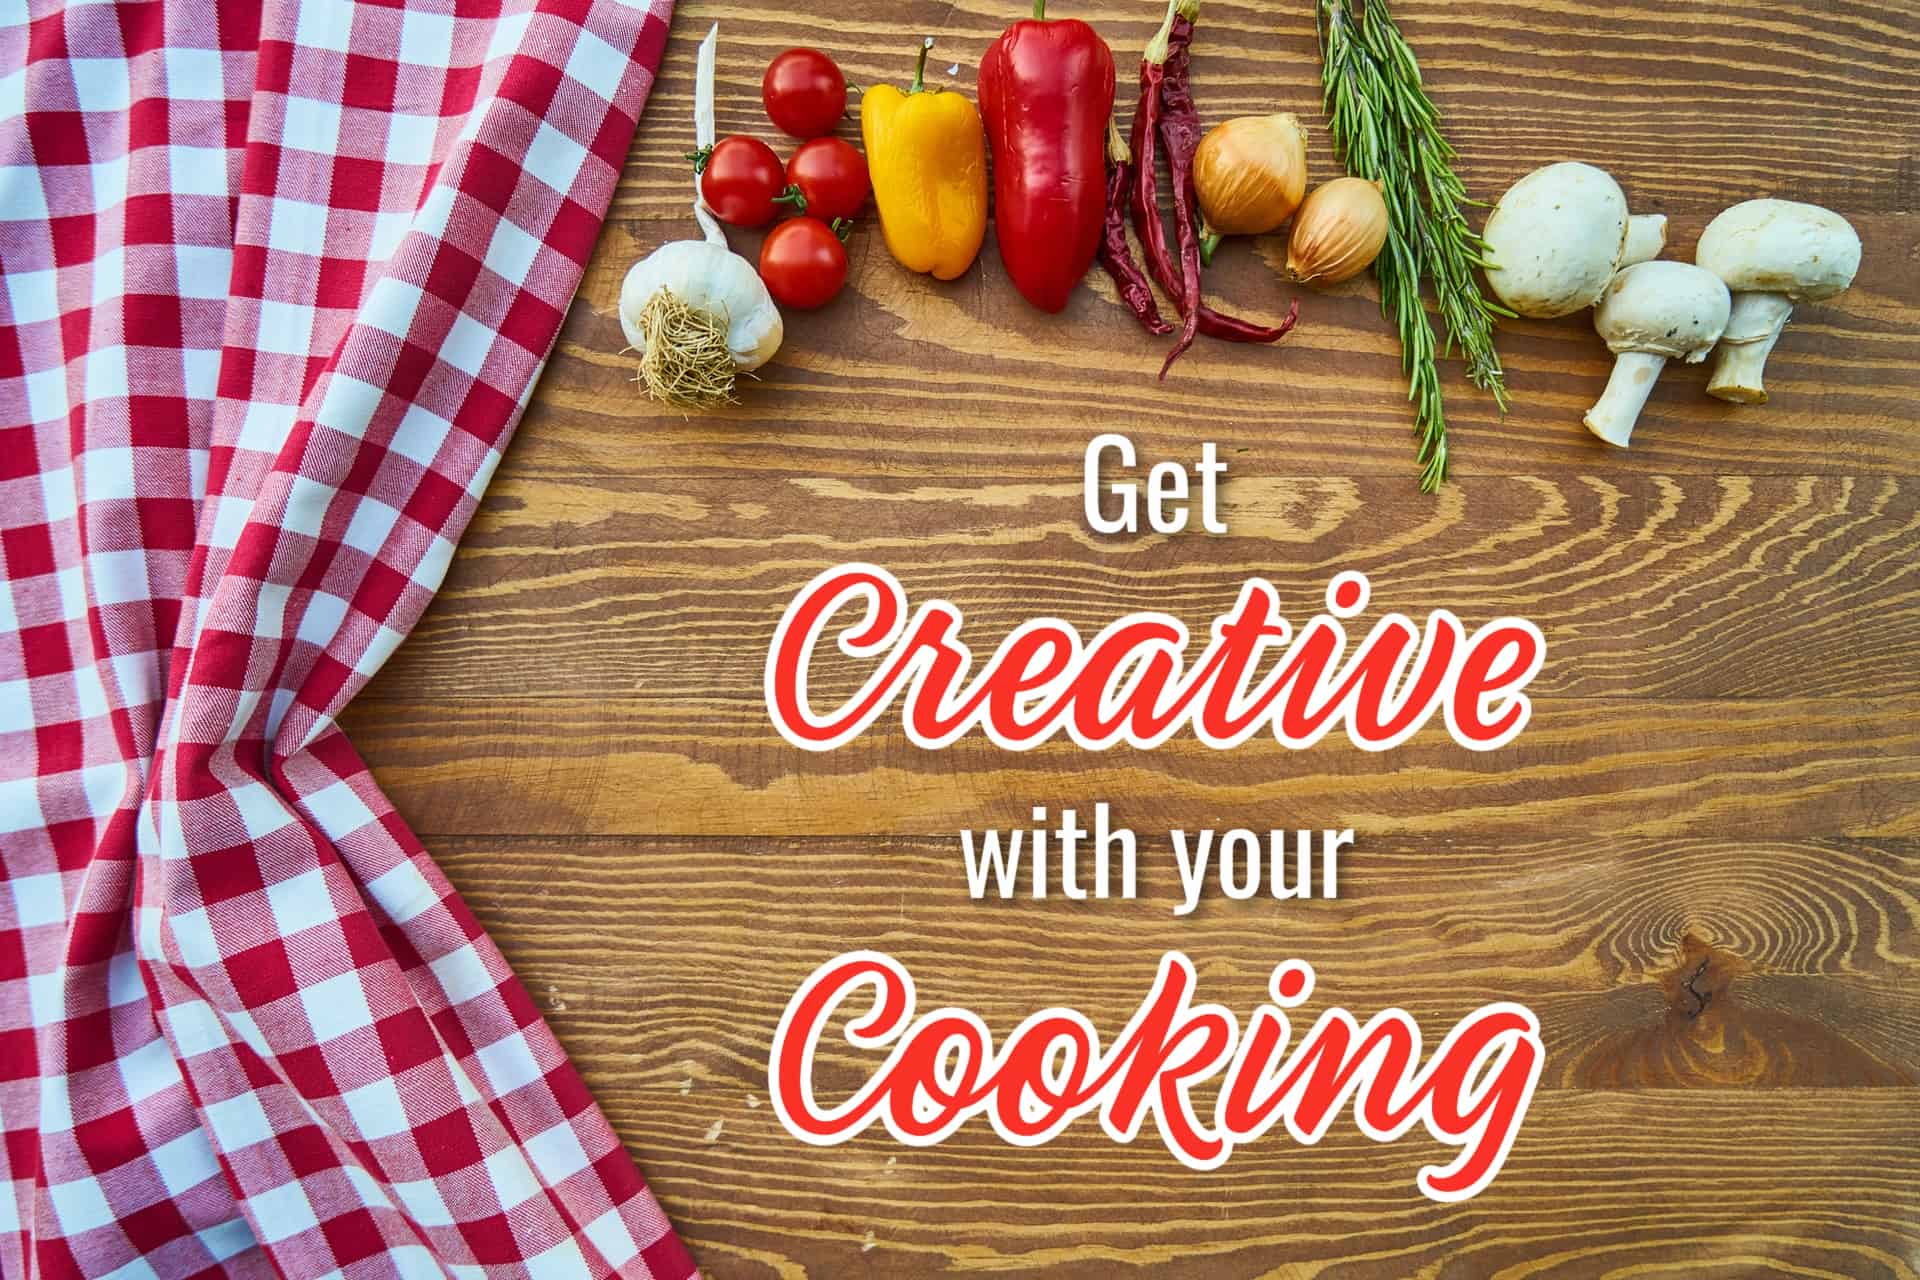 7 Ways to Get Creative with Your Cooking